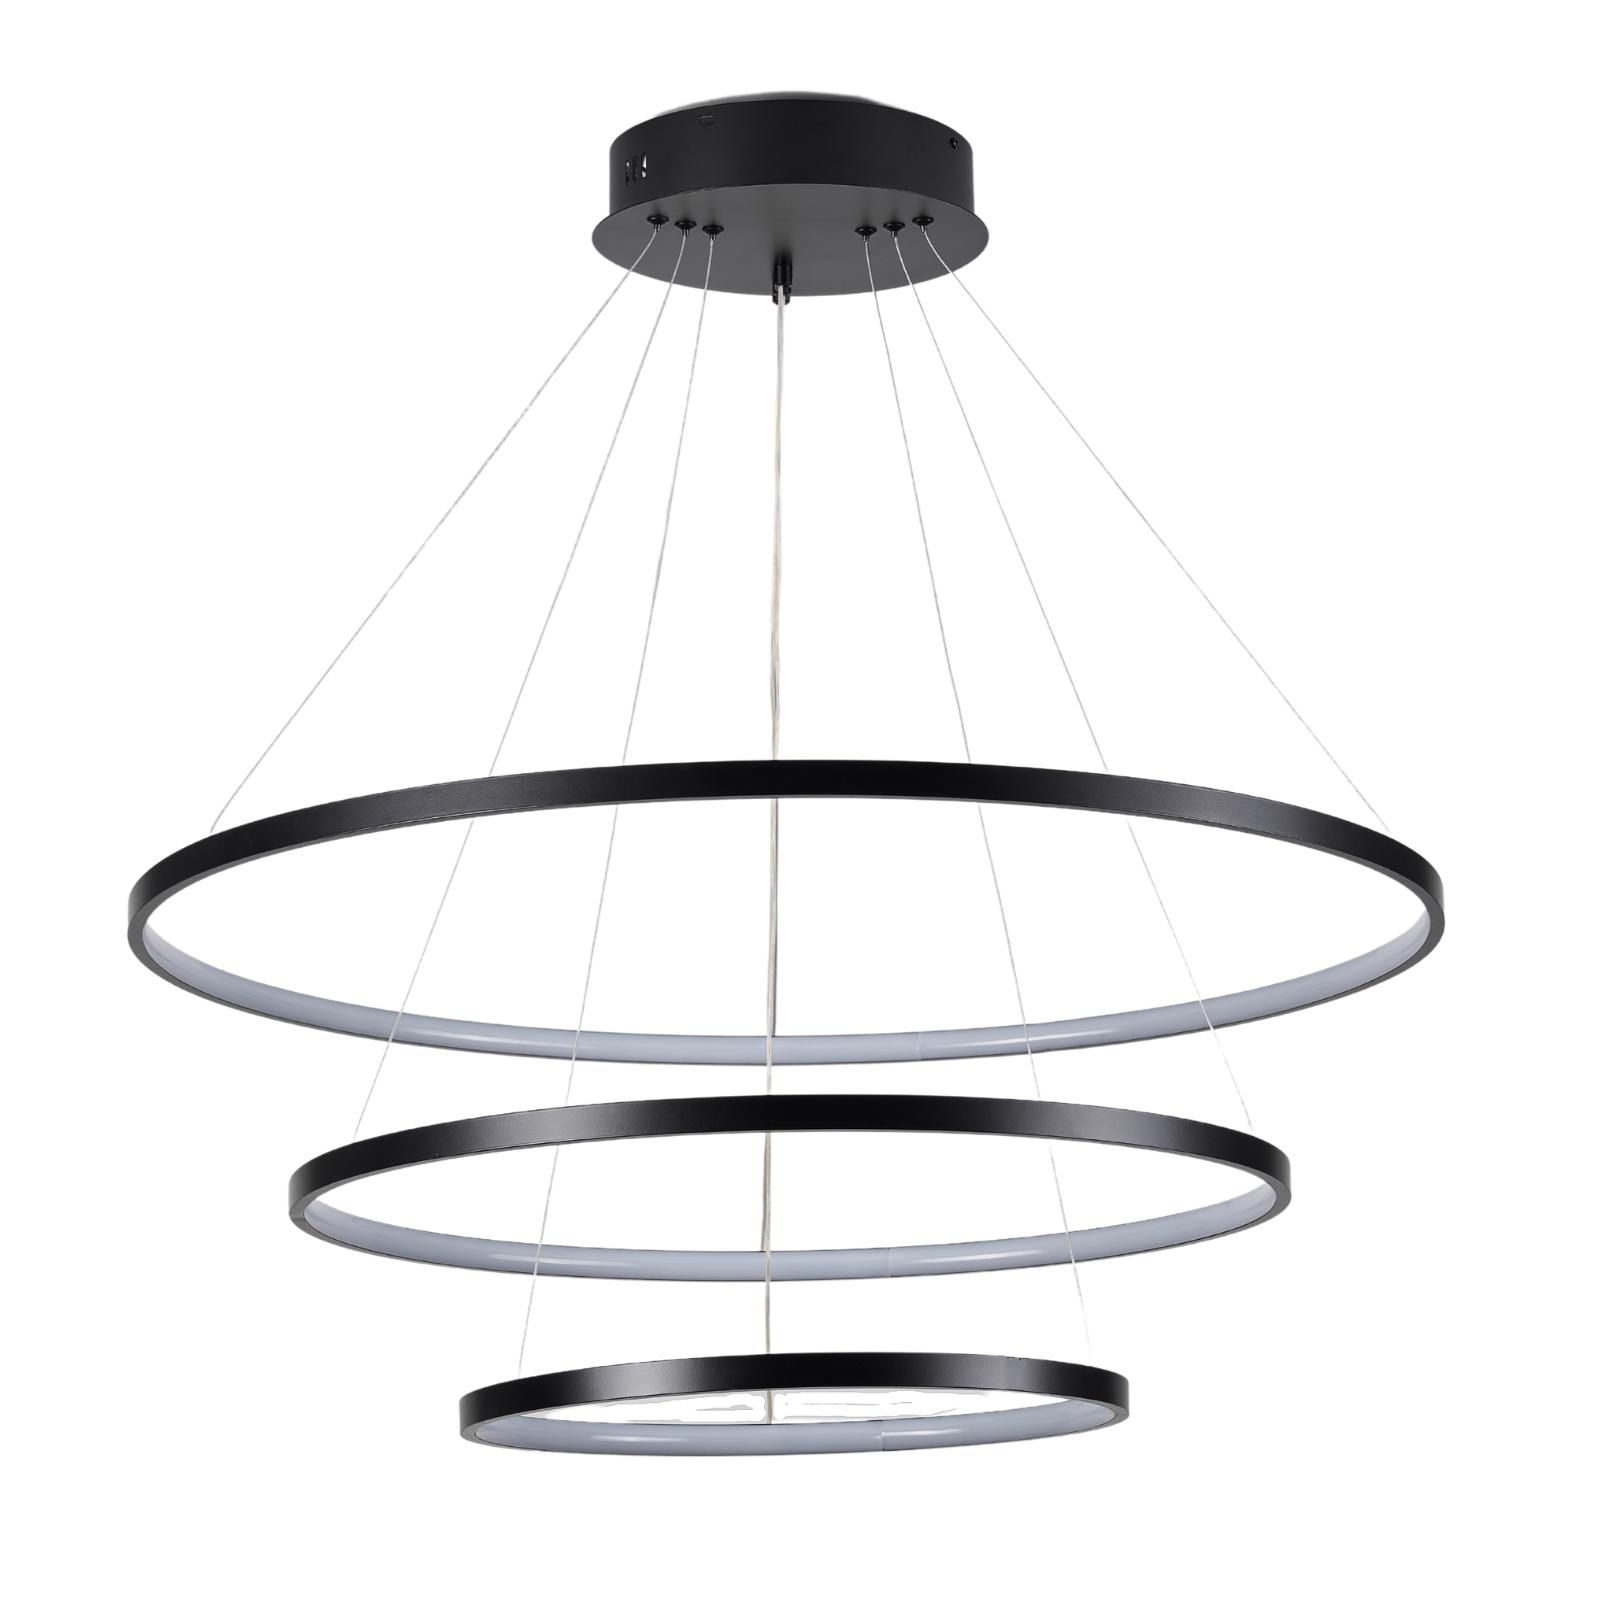 Black Trio Circle Hanglamp - By Suitta